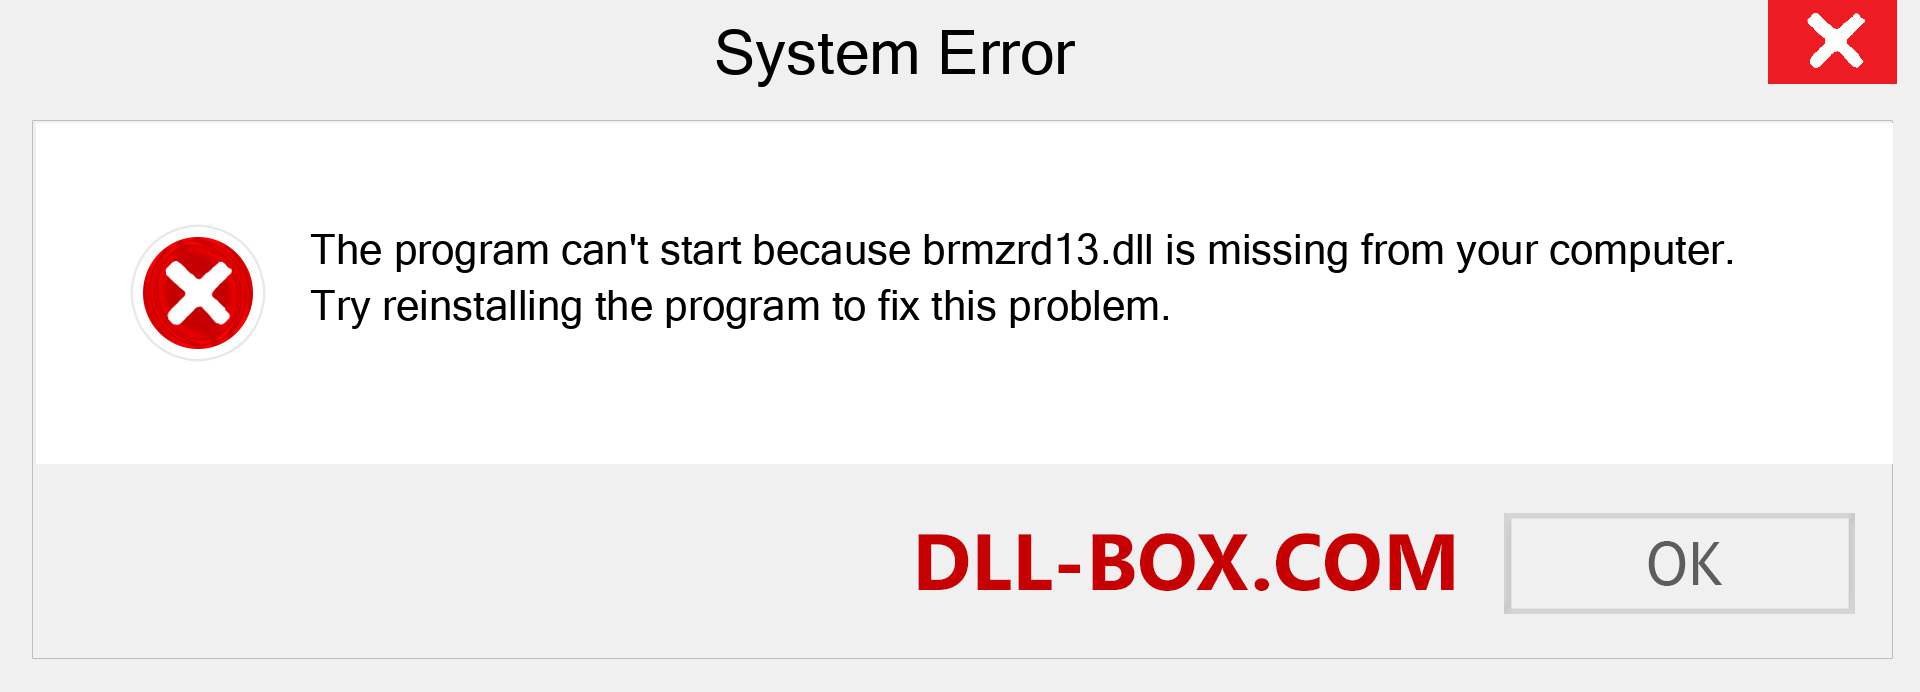  brmzrd13.dll file is missing?. Download for Windows 7, 8, 10 - Fix  brmzrd13 dll Missing Error on Windows, photos, images